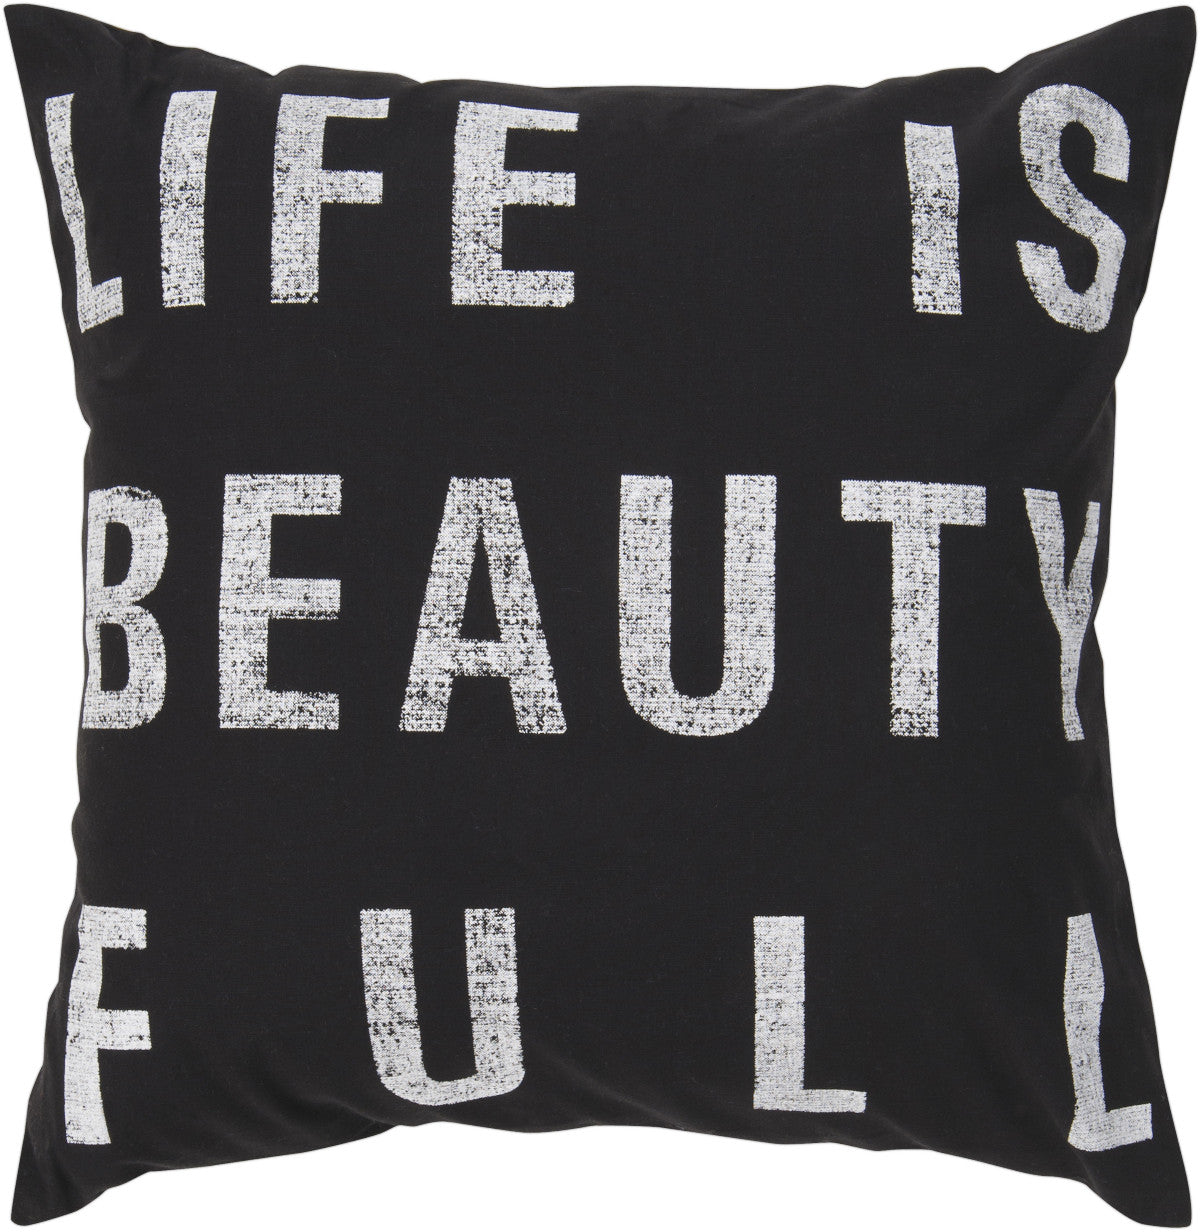 Surya Typography Life is Beauty ST-082 Pillow